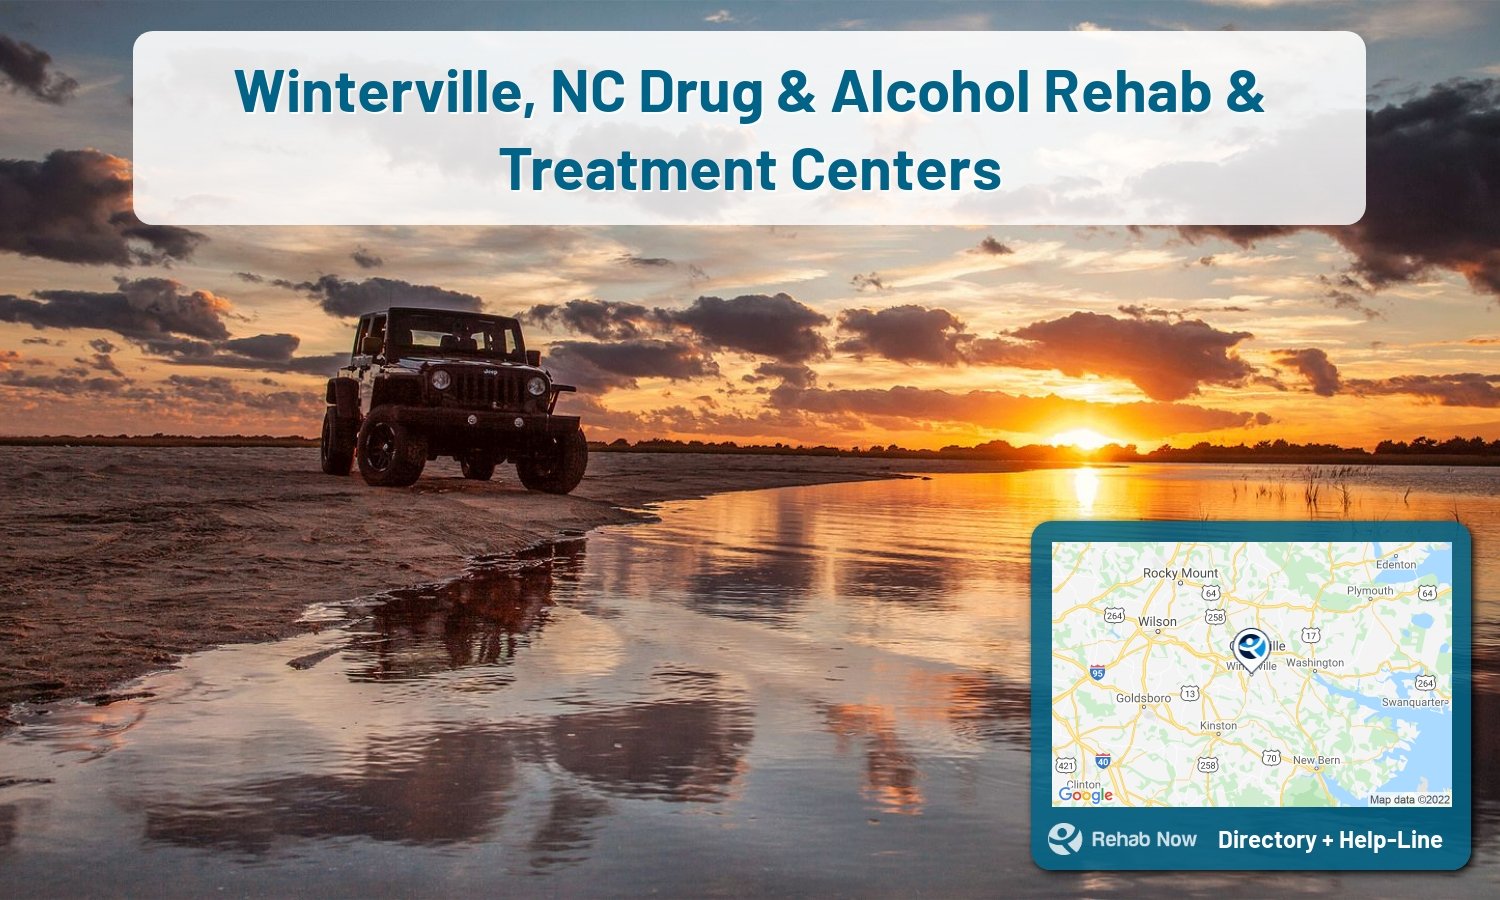 Our experts can help you find treatment now in Winterville, North Carolina. We list drug rehab and alcohol centers in North Carolina.